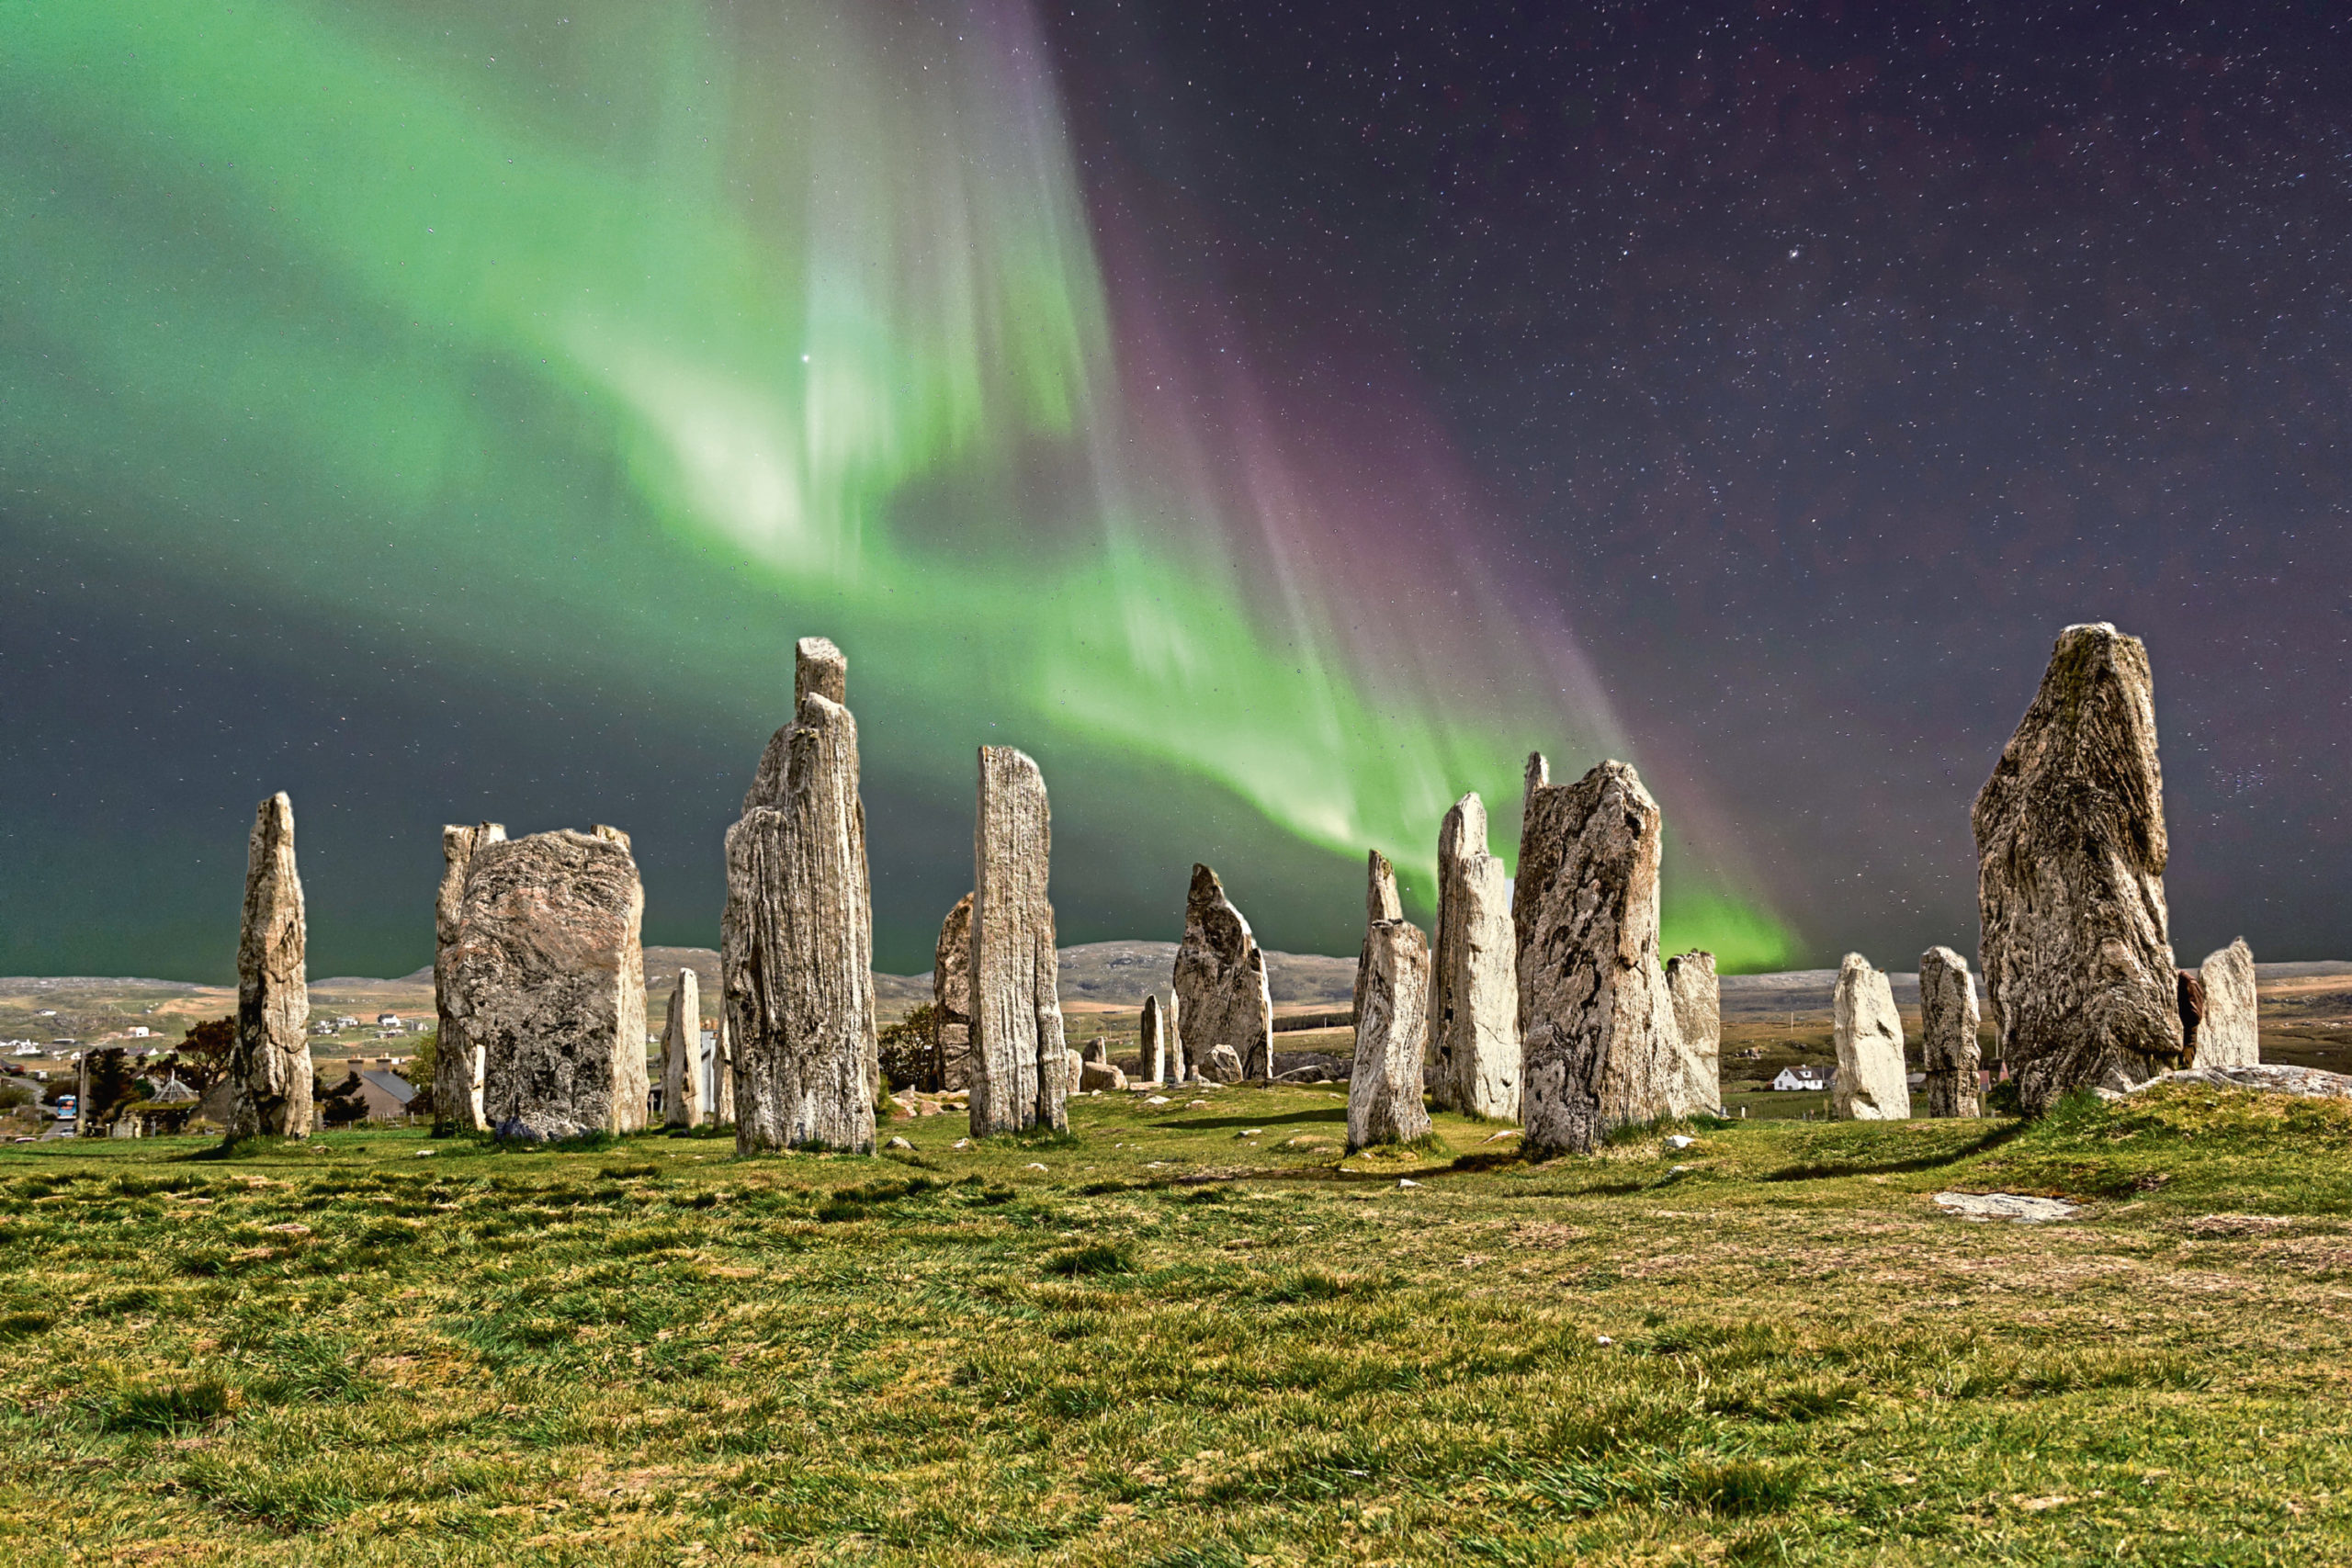 'I imagine a field of magnificent standing stones, maybe each five metres high, echoing the beauty of Callanish on Lewis.'